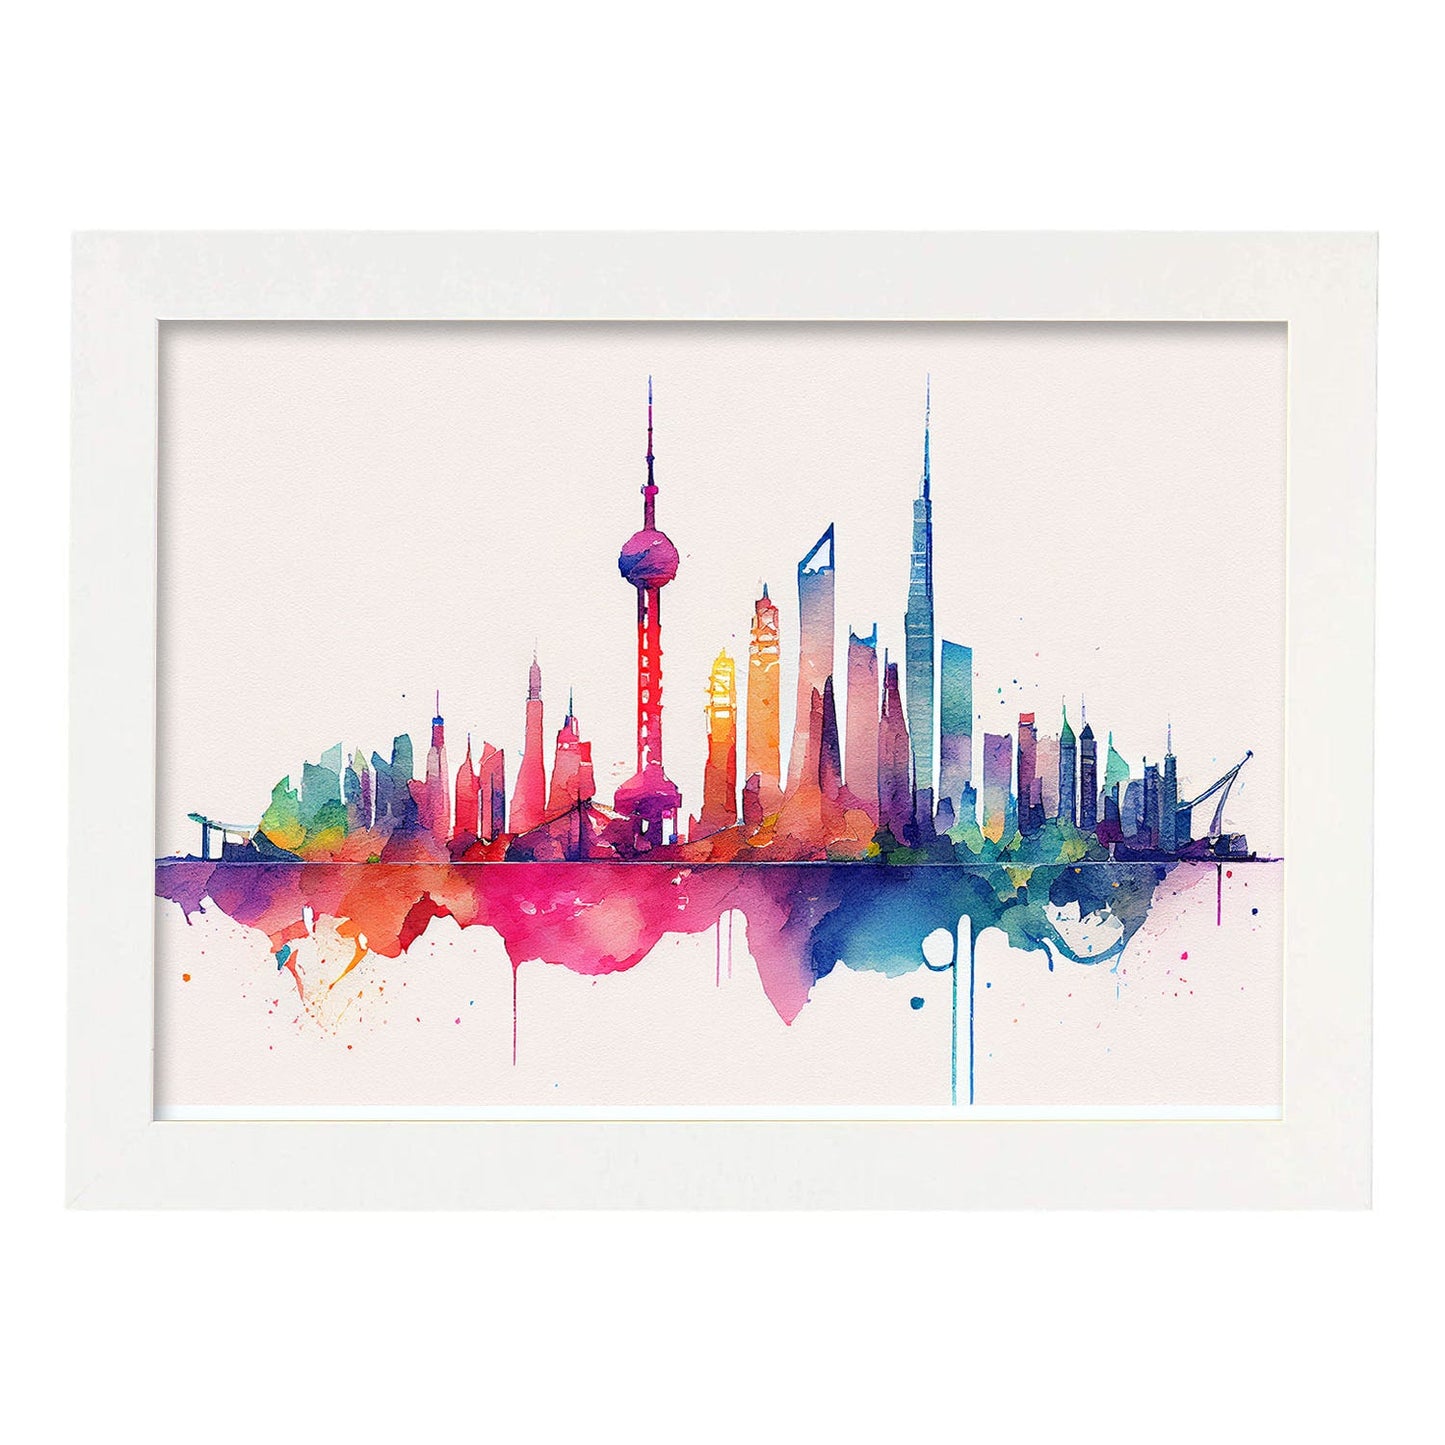 Nacnic watercolor of a skyline of the city of Shanghai_1. Aesthetic Wall Art Prints for Bedroom or Living Room Design.-Artwork-Nacnic-A4-Marco Blanco-Nacnic Estudio SL